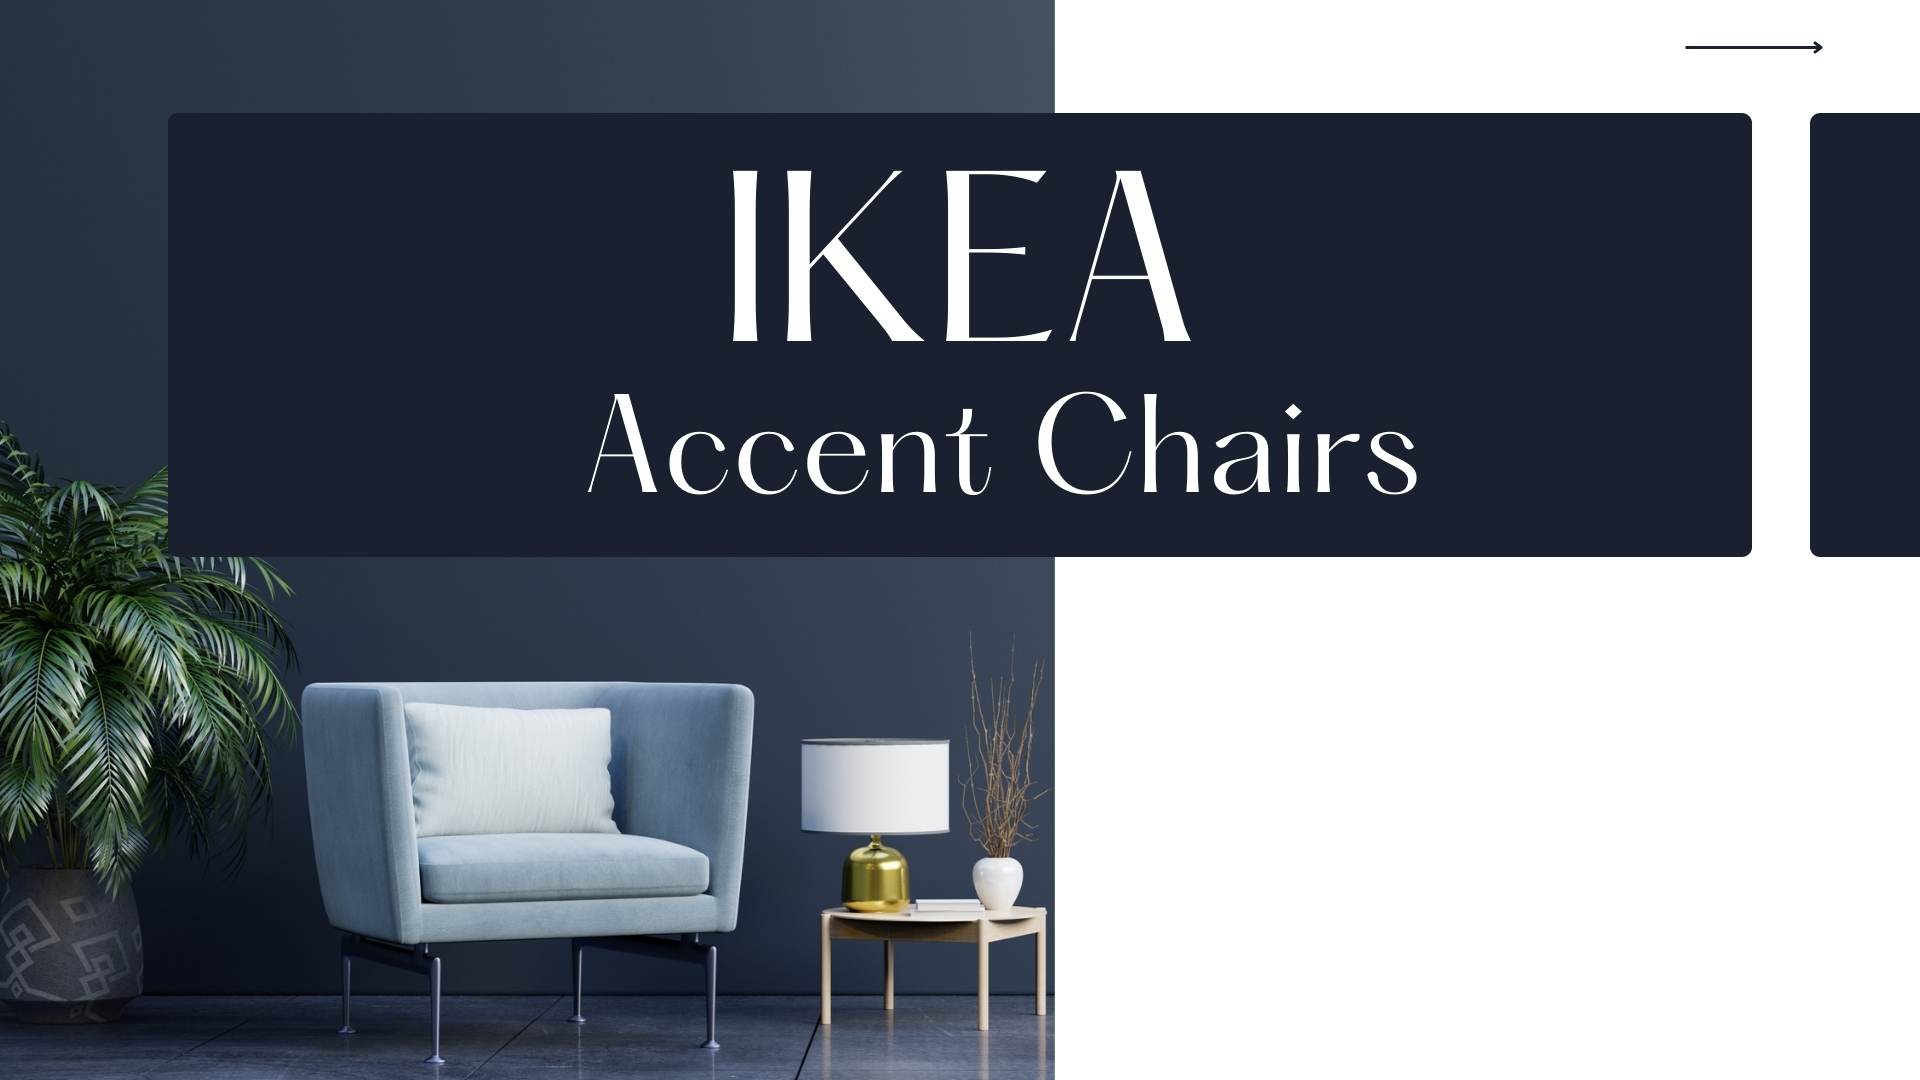 IKEA Accent Chairs